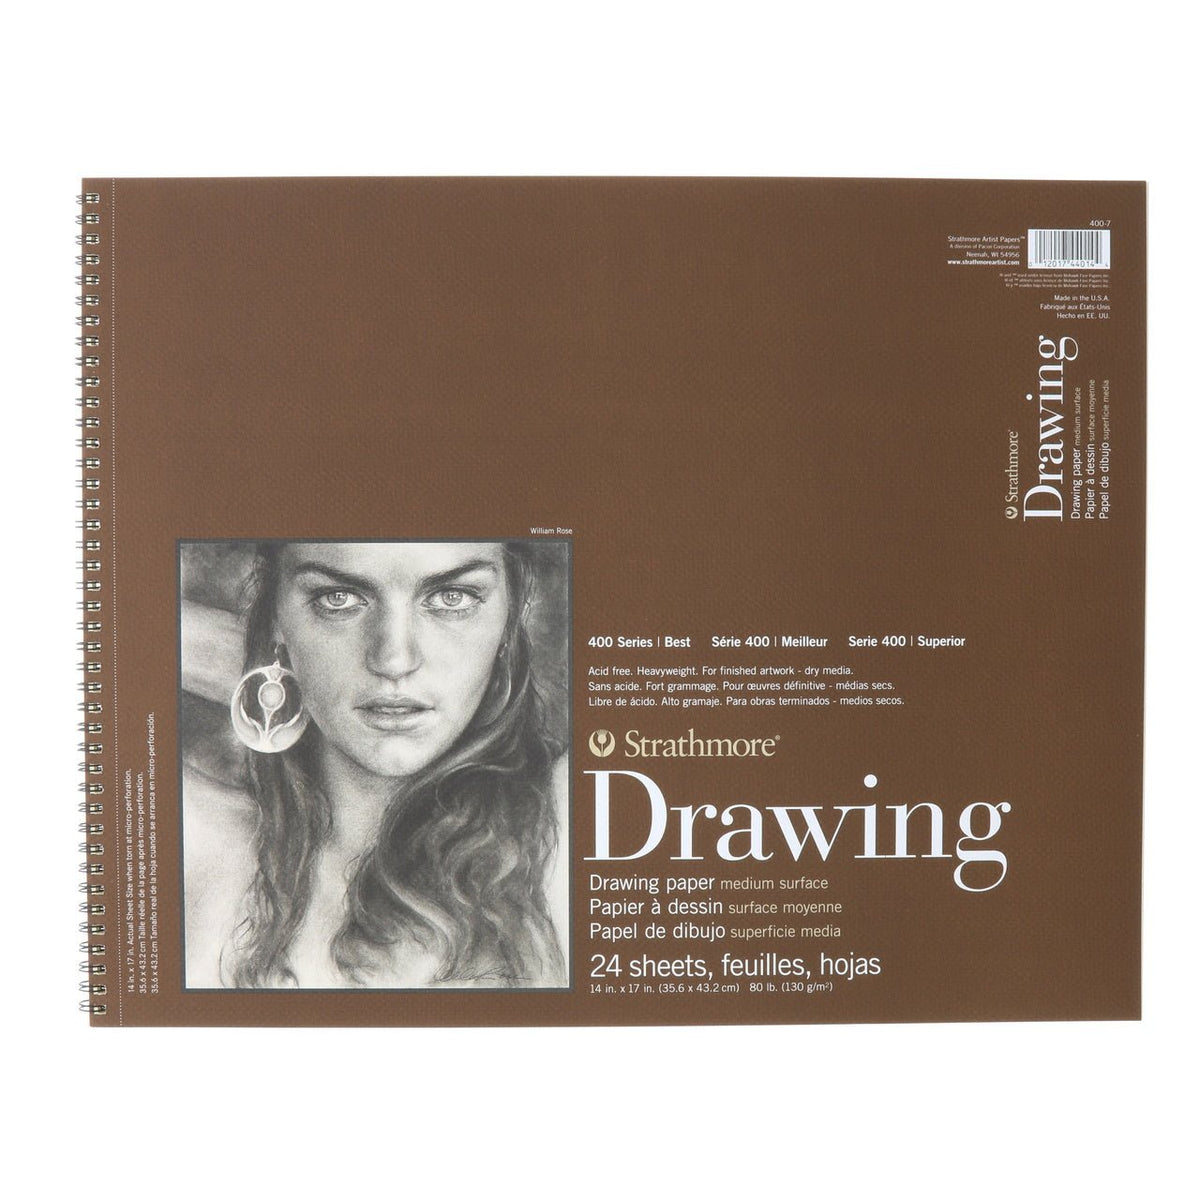 Strathmore Sketch Paper Pads